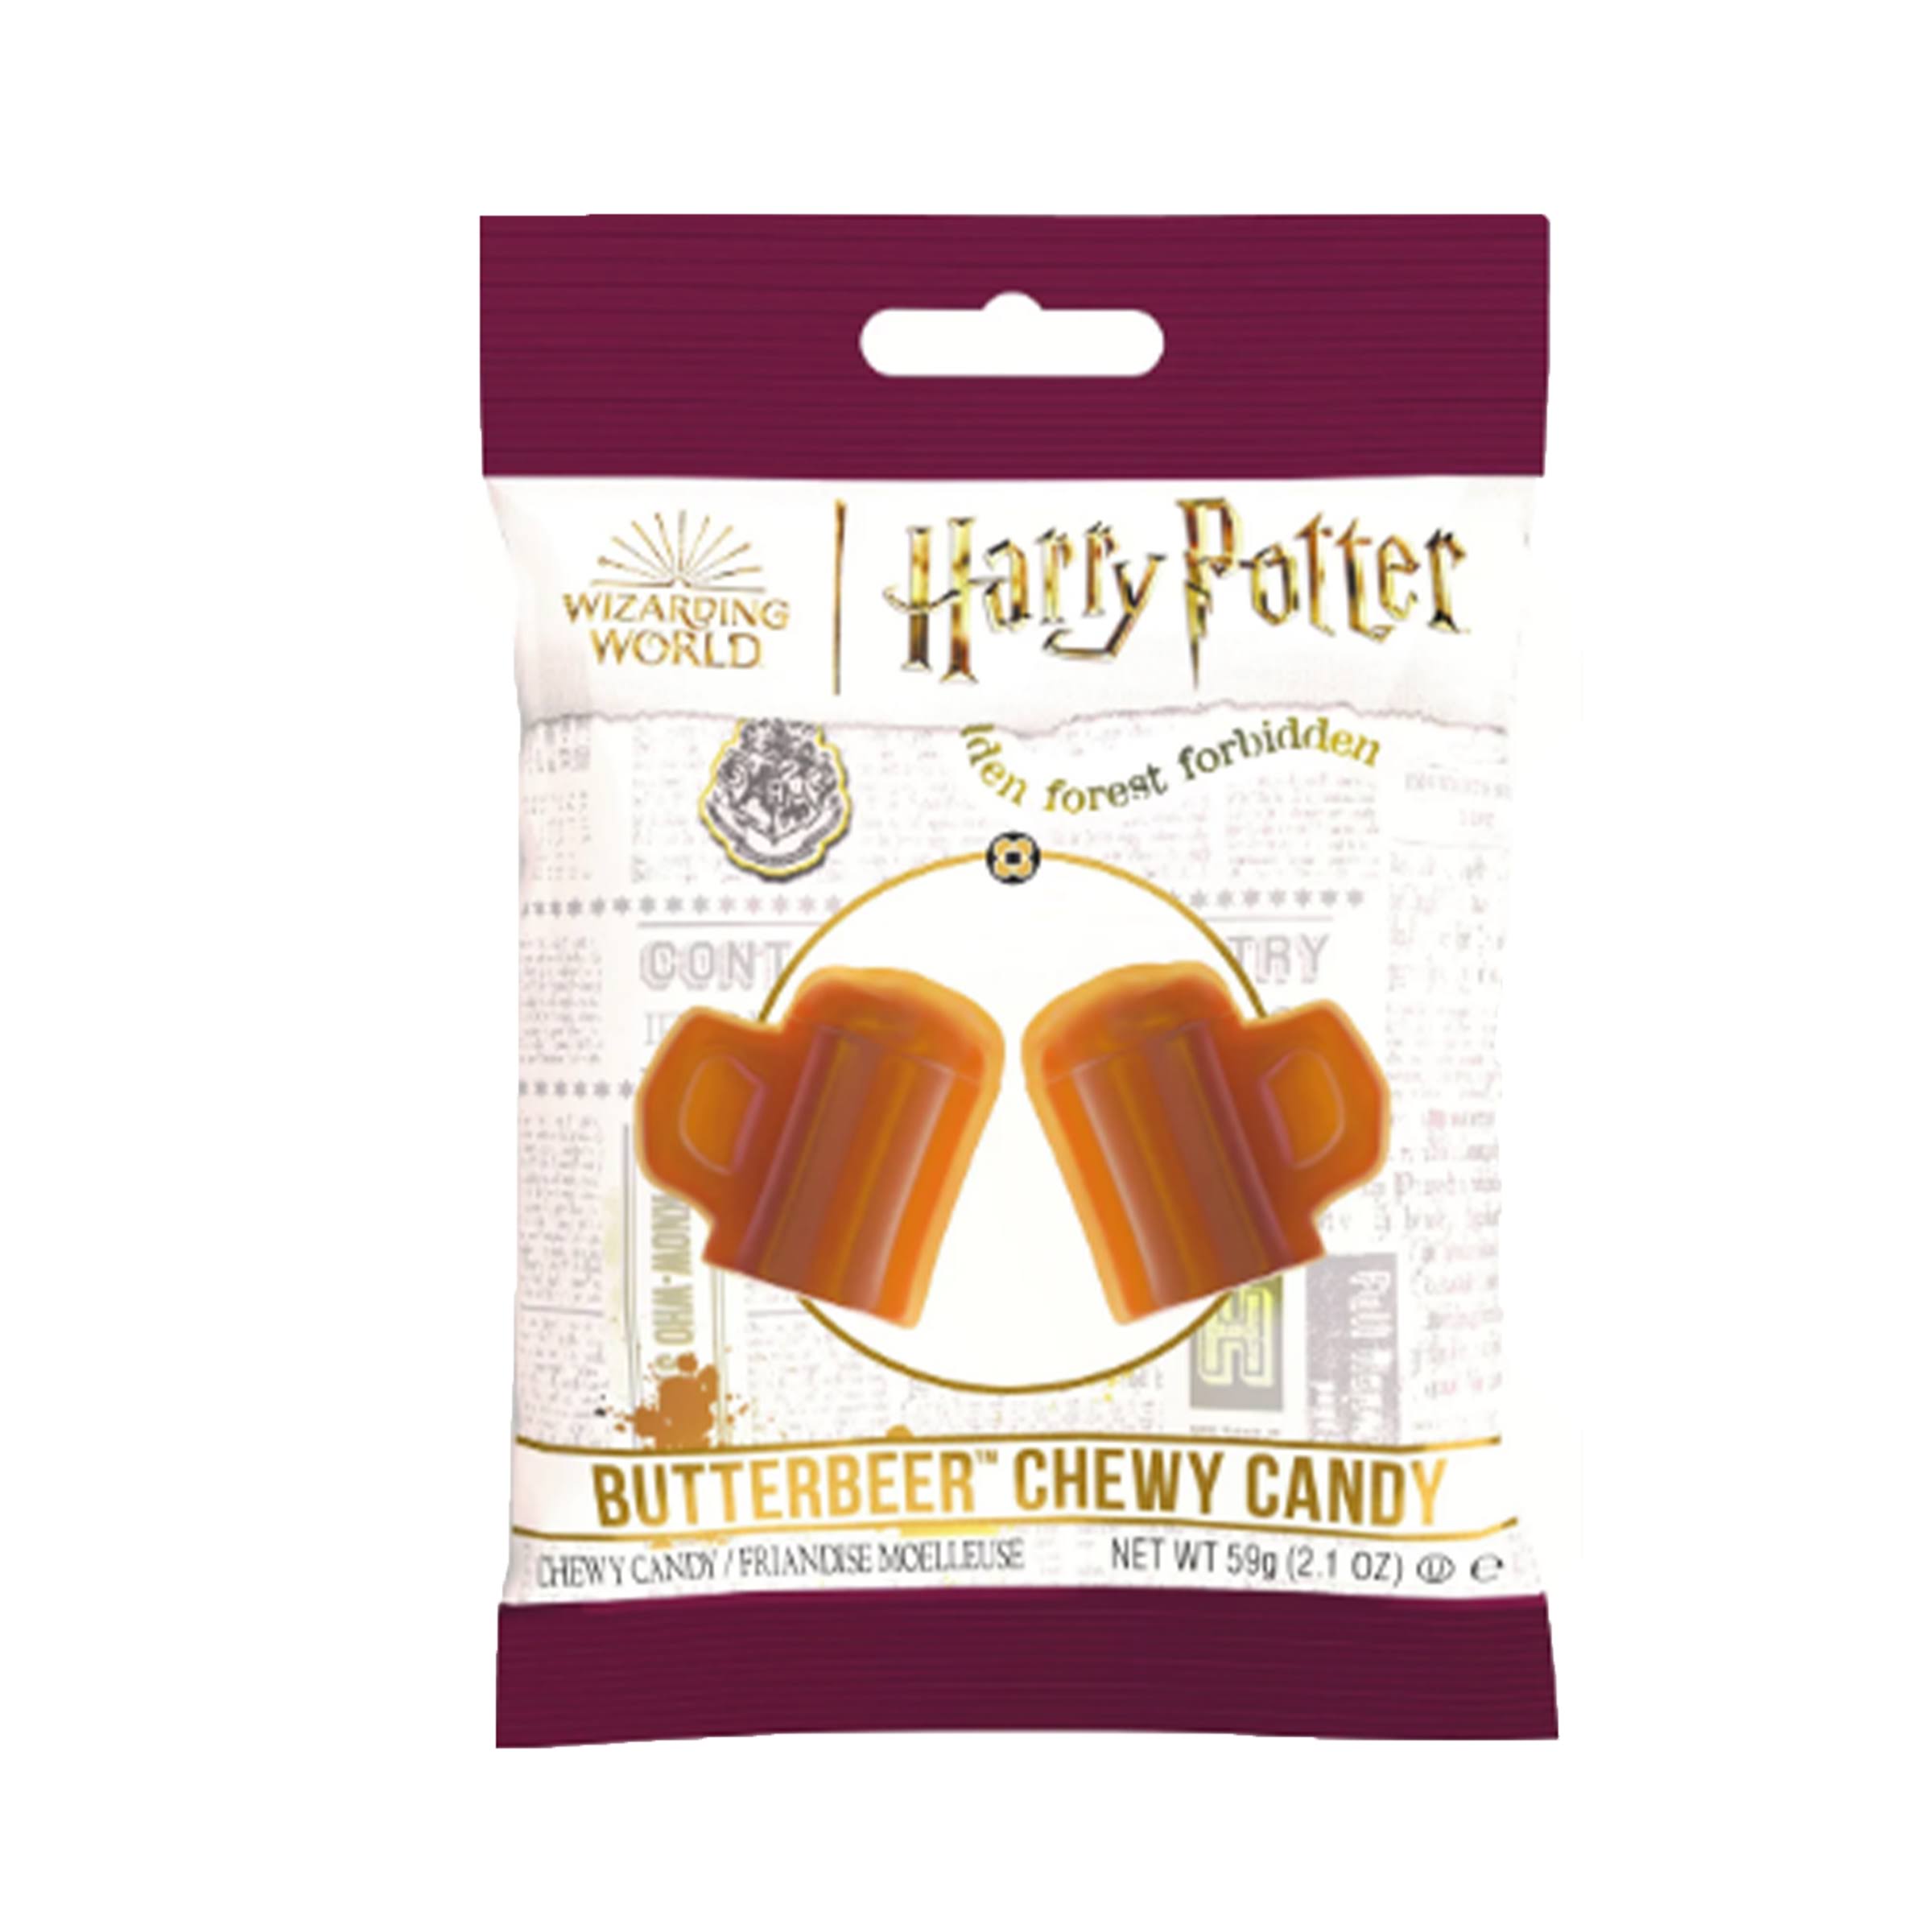 *Harry Potter Butterbeer Chewy Candy